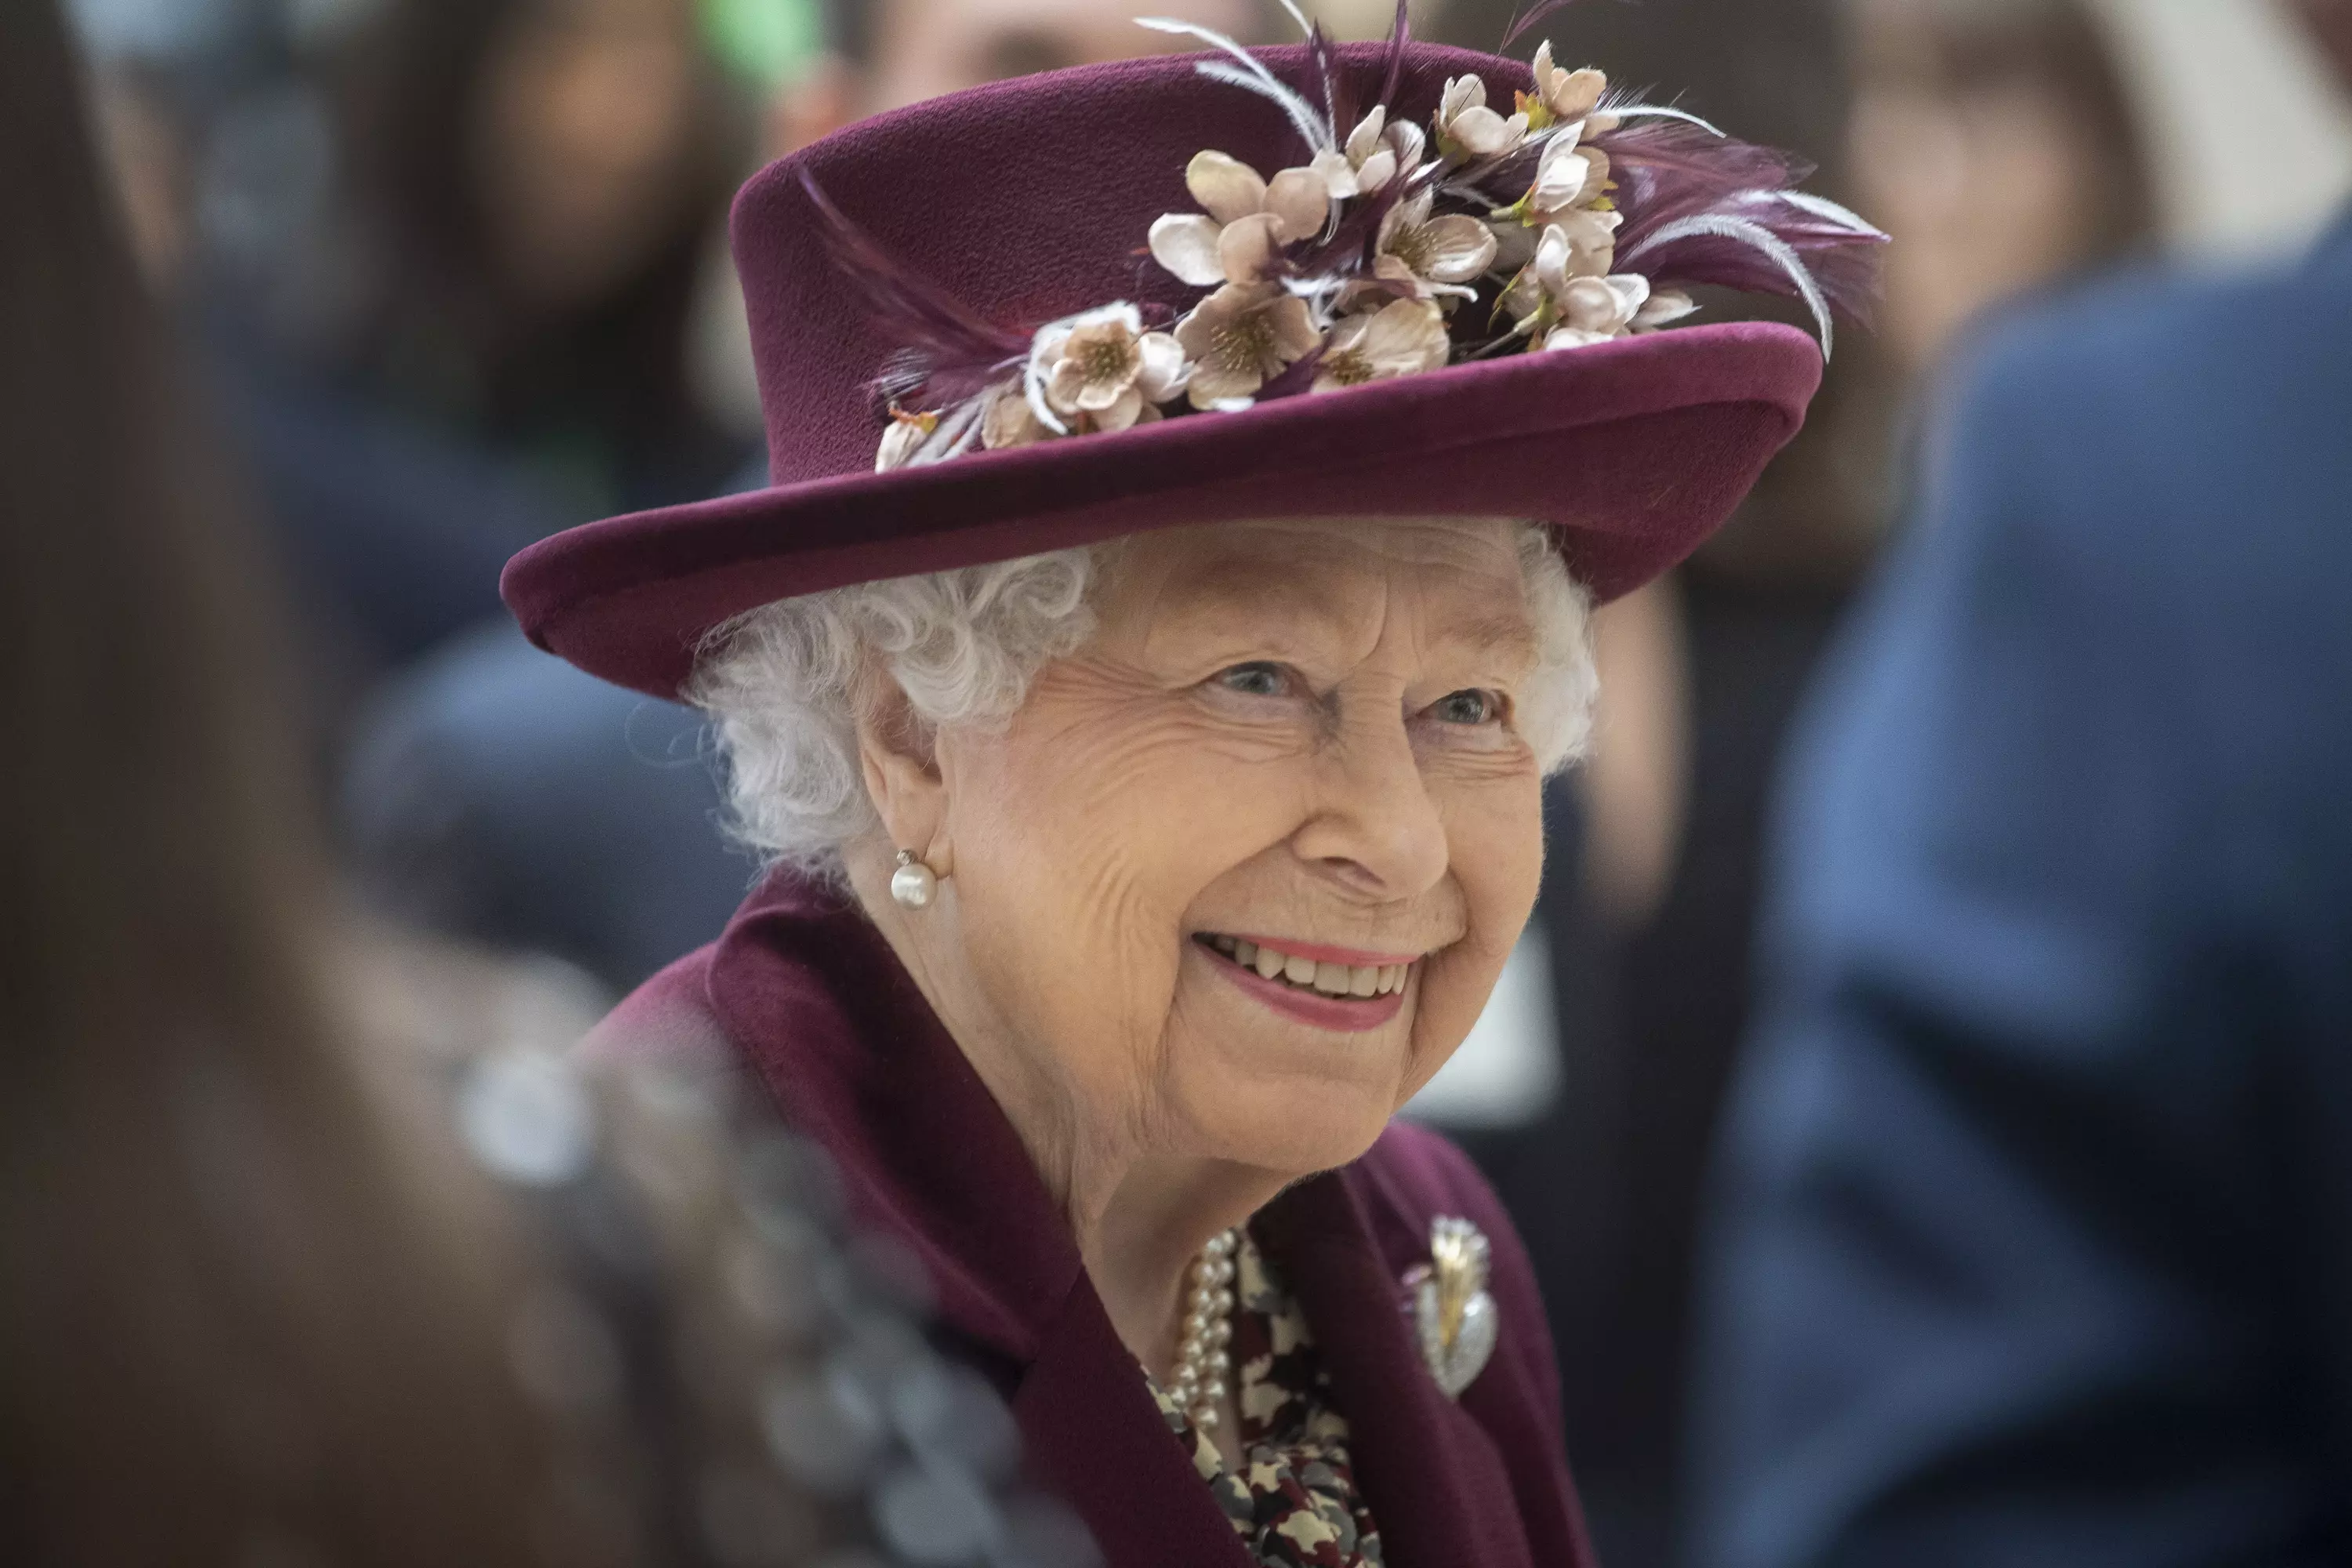 The Queen has honoured the sex toy site (